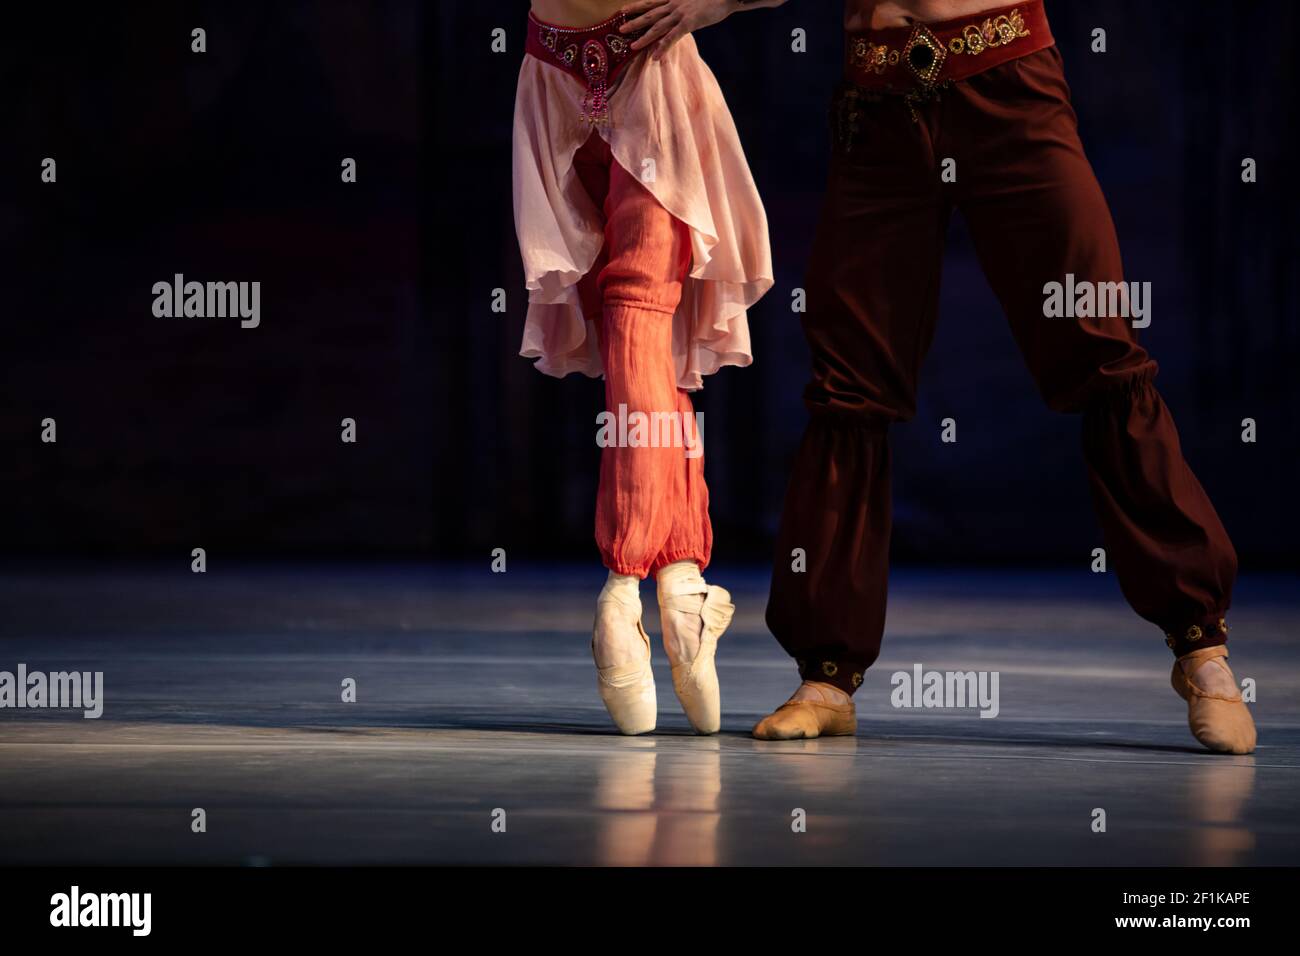 Closeup of classic ballet couple on stage Stock Photo - Alamy